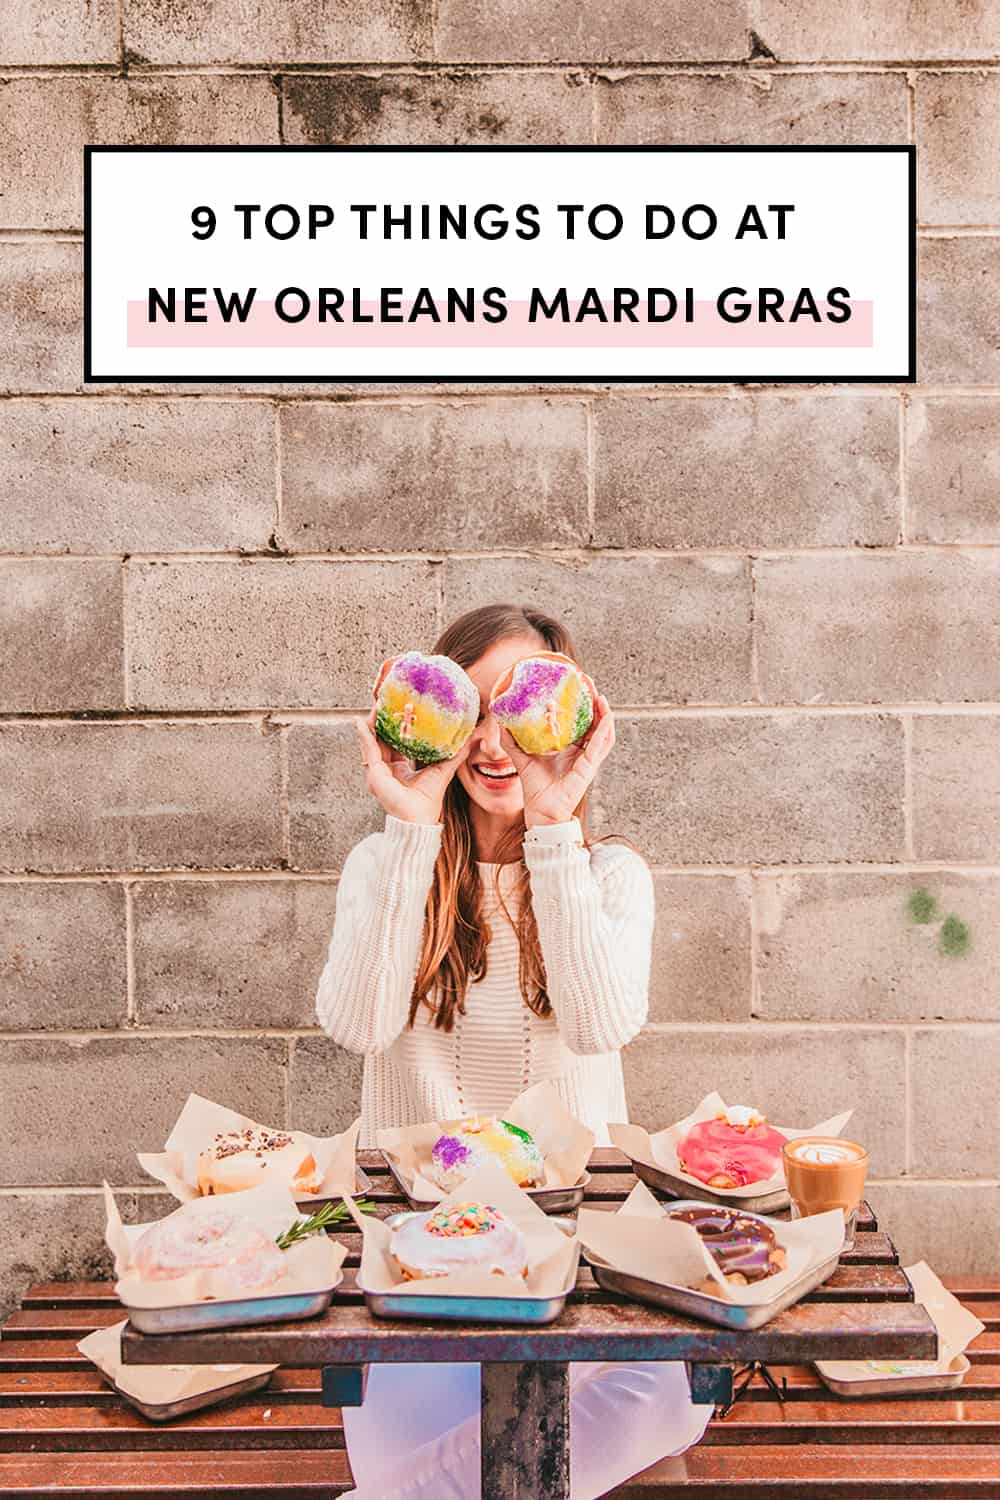 9 Top Things To Do At New Orleans Mardi Gras